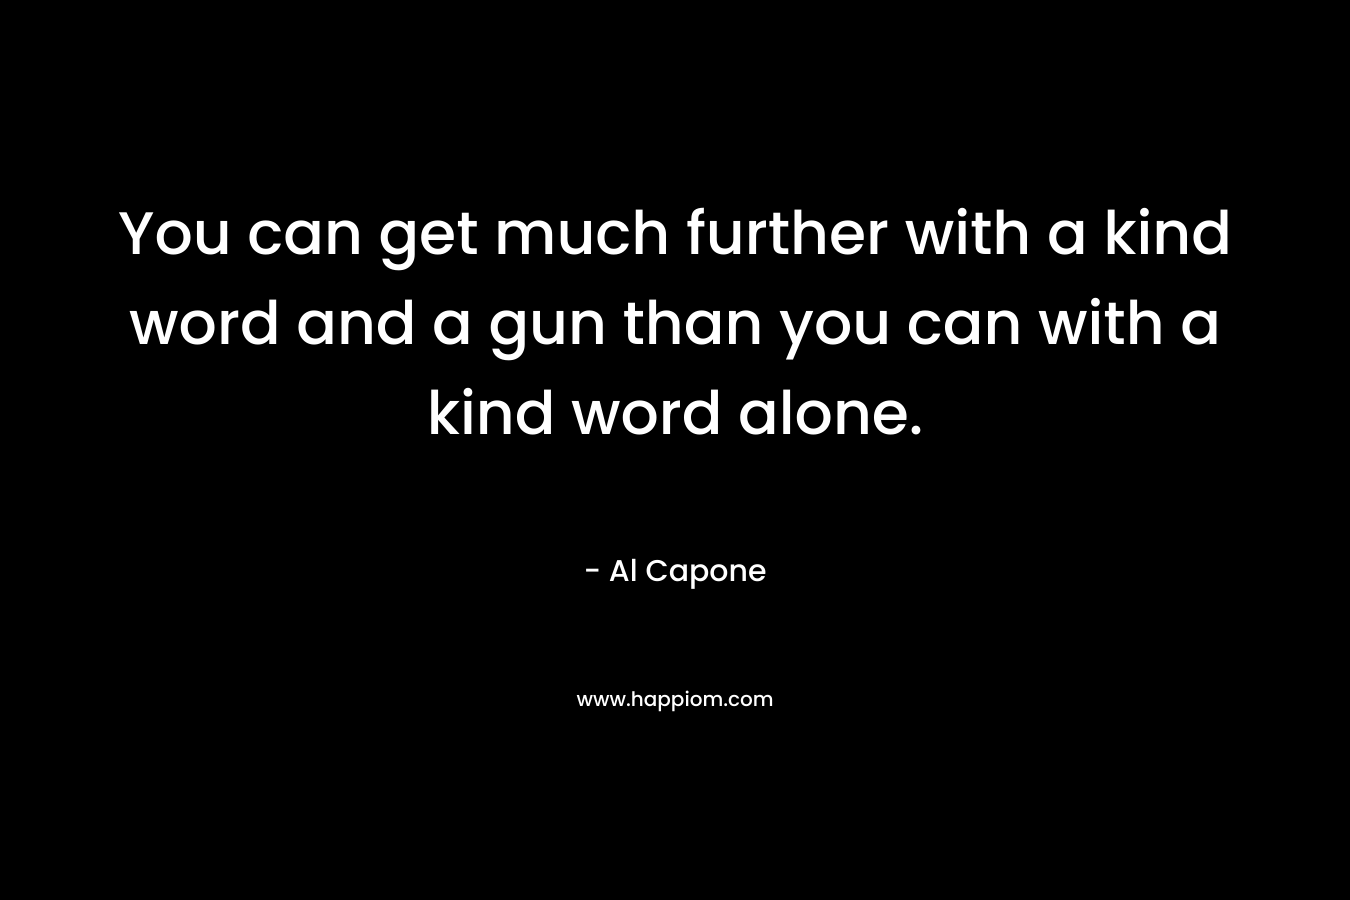 You can get much further with a kind word and a gun than you can with a kind word alone.